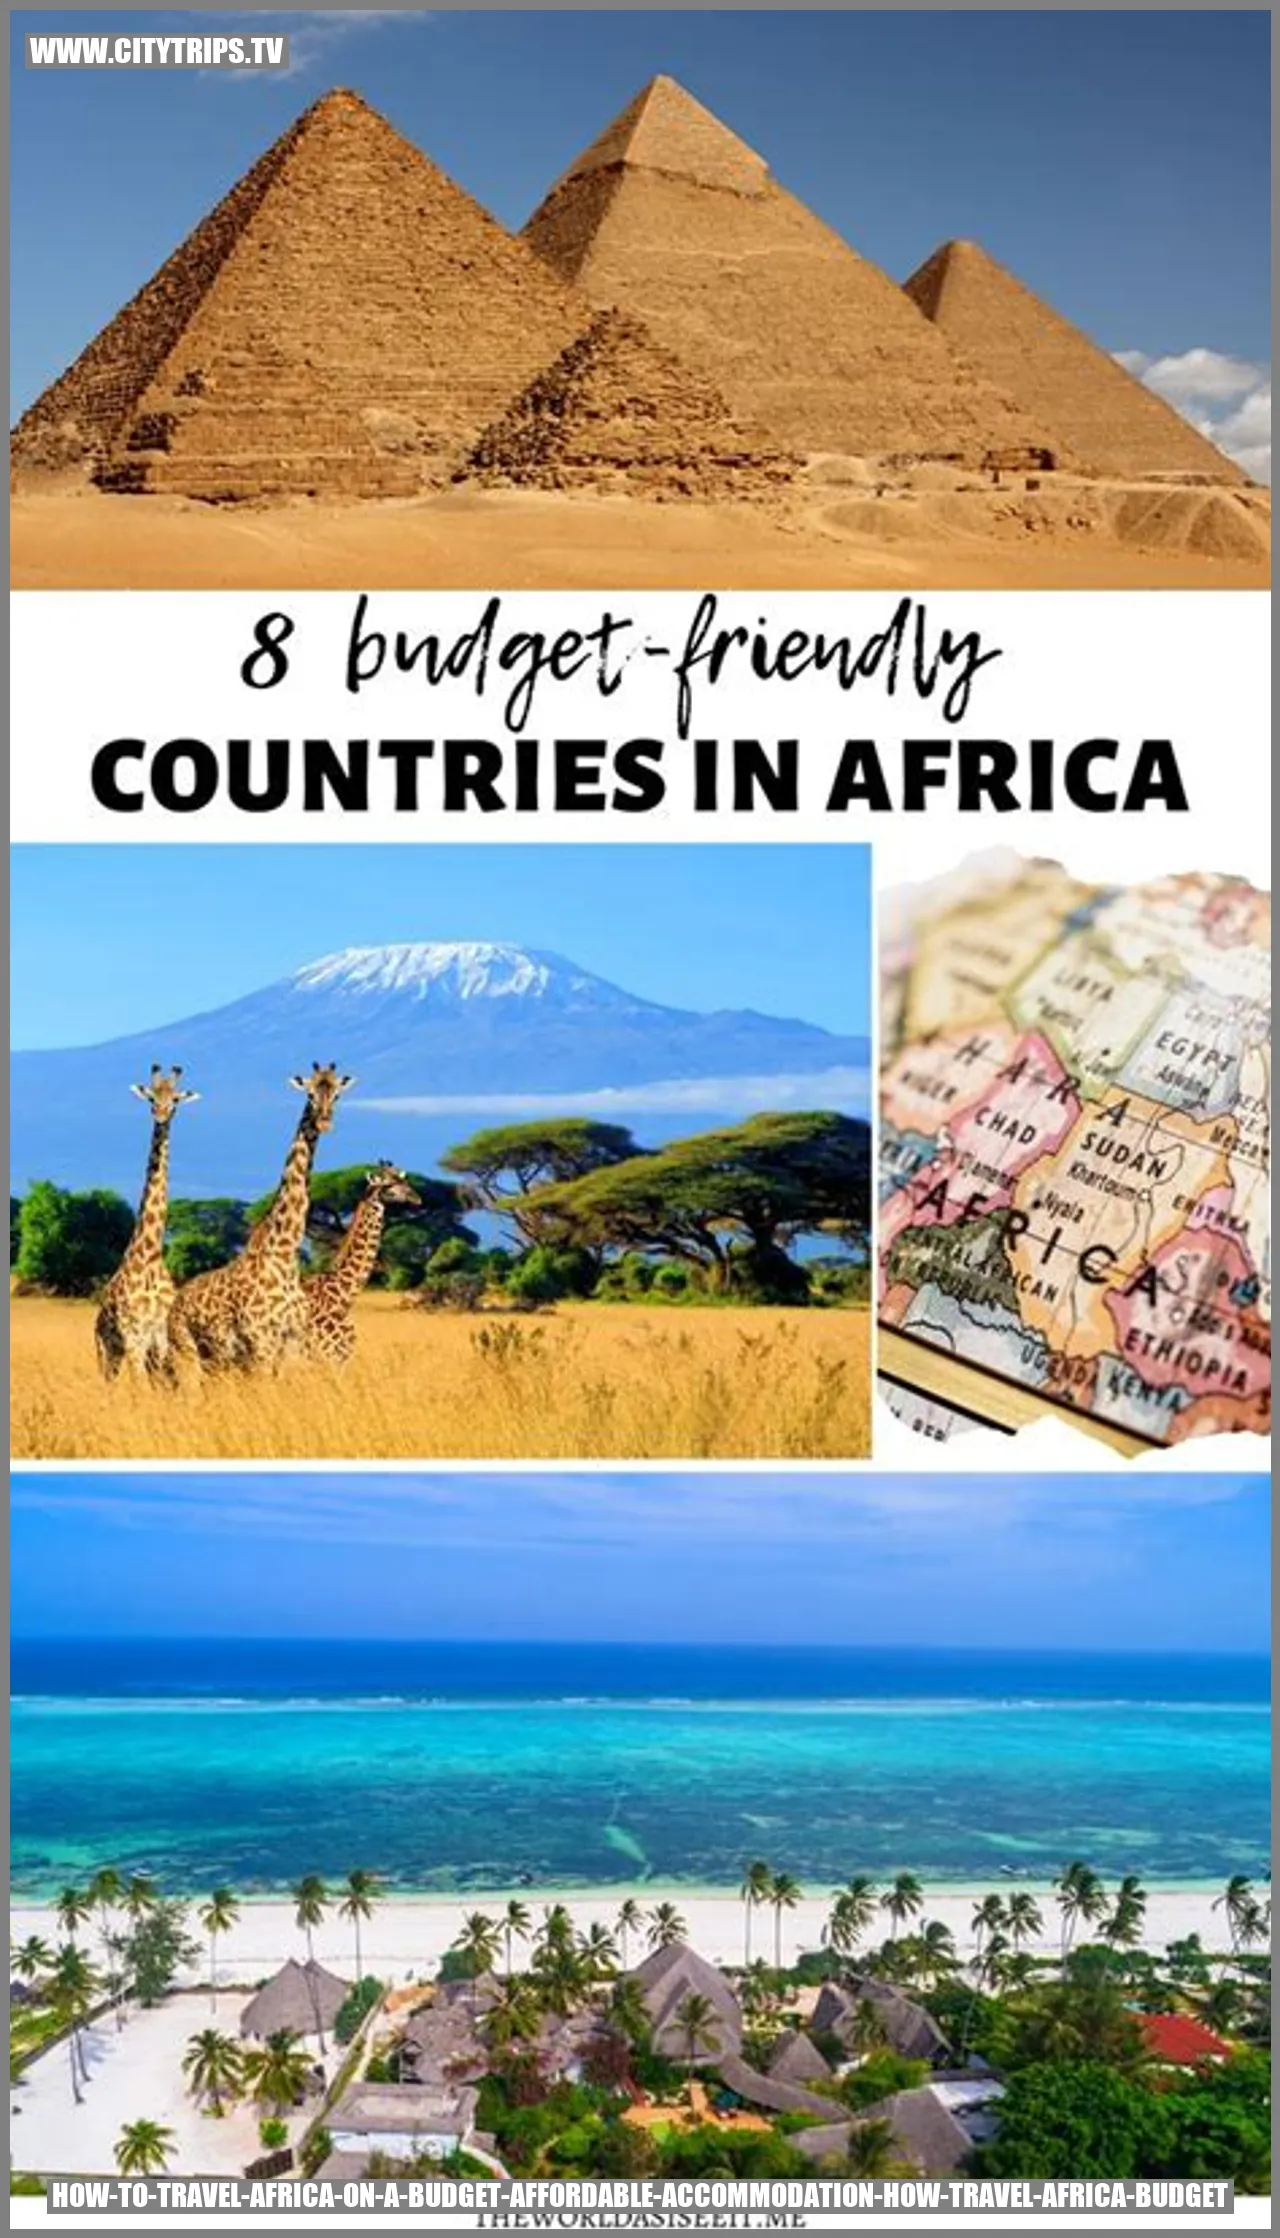 How to Travel to Africa on a Budget: Affordable Accommodation